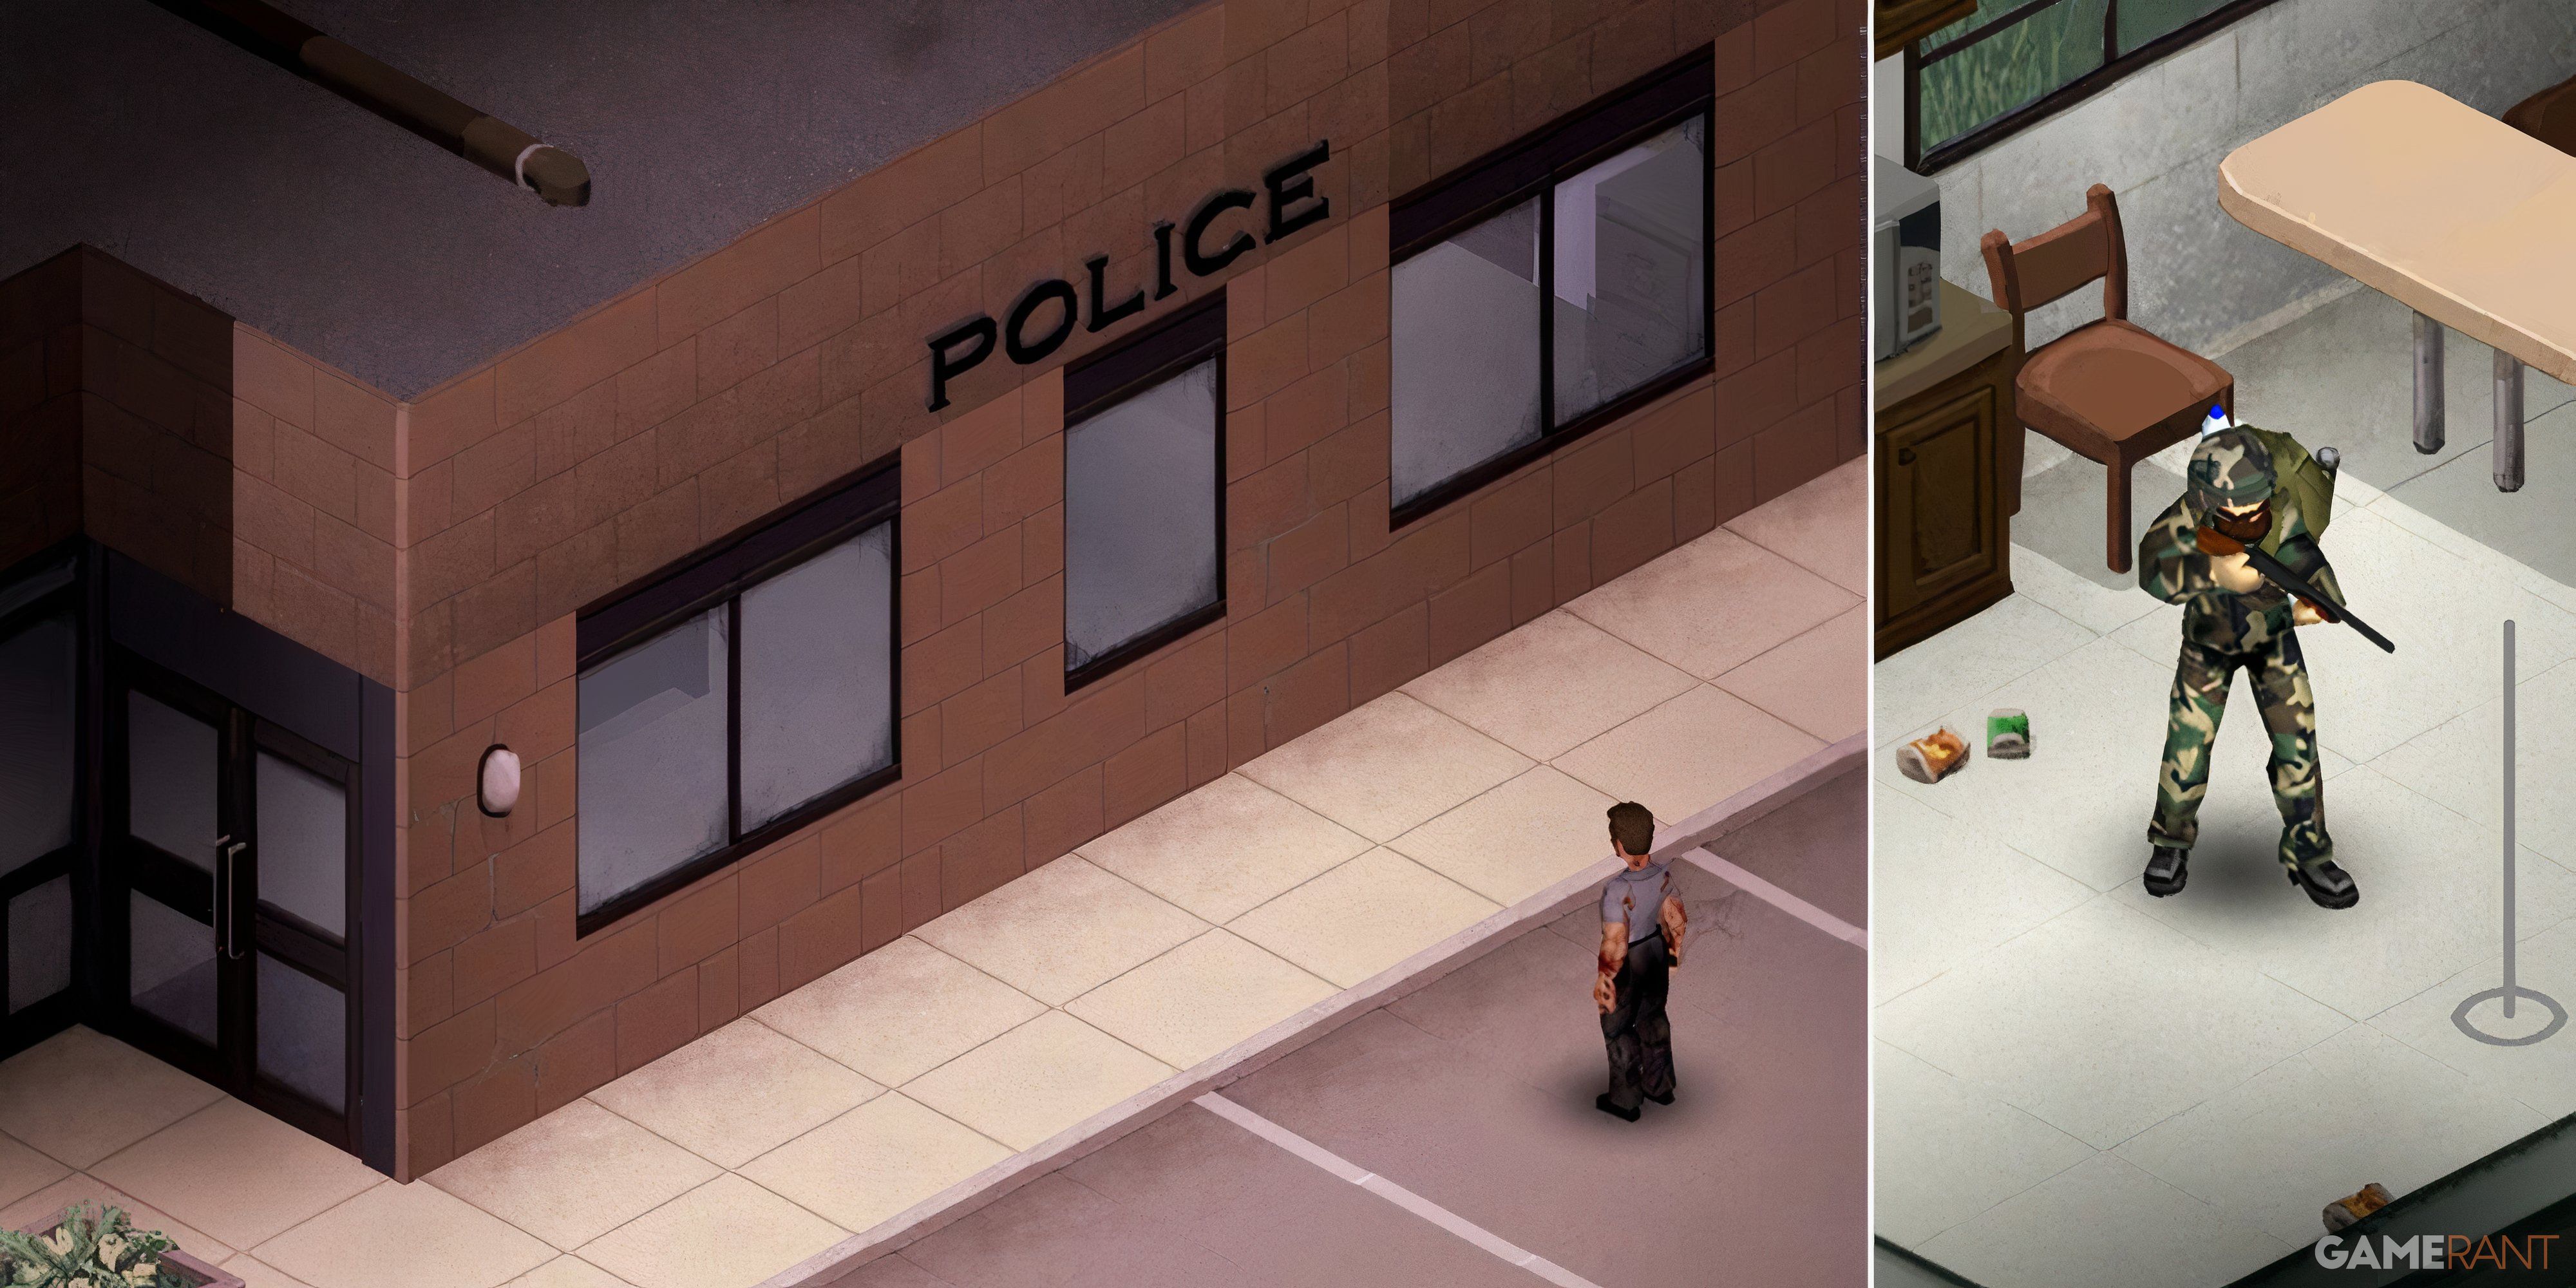 an image of the outside of a police station alongside a player character in full tac gear with a gun